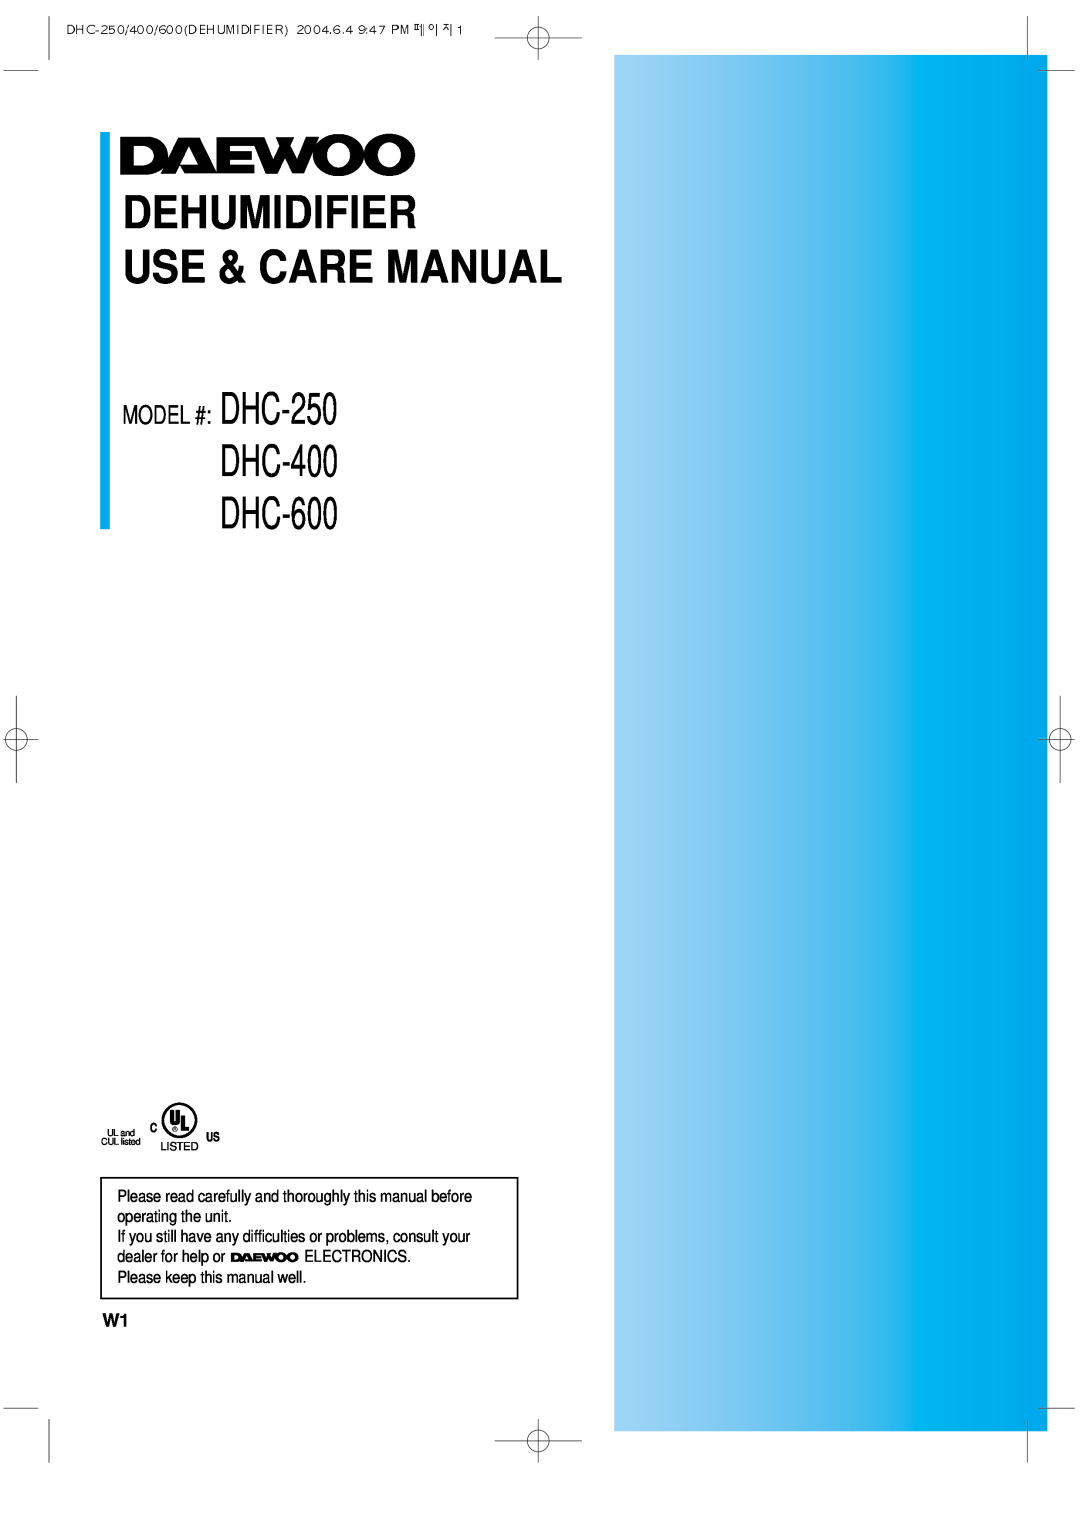 Daewoo manual Dehumidifier Use & Care Manual, DHC-400 DHC-600, MODEL # DHC-250 